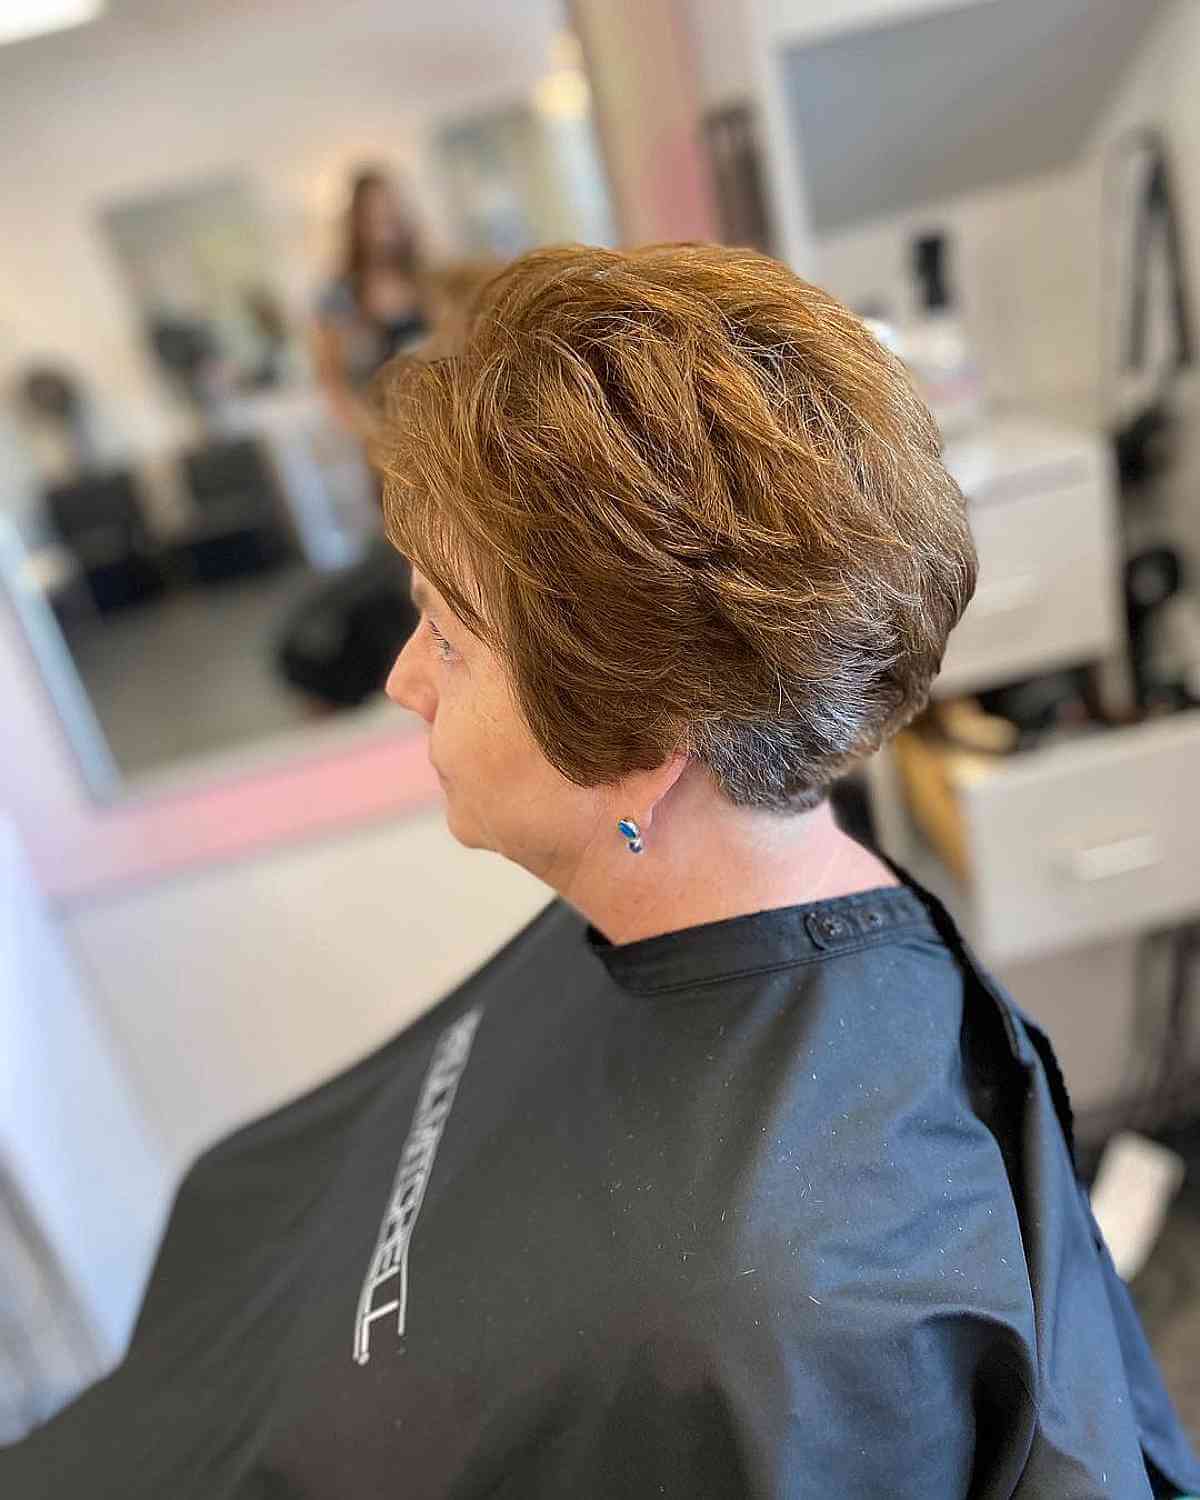 Wash-and-Wear Round Wedge Haircut for Ladies in Their 70s